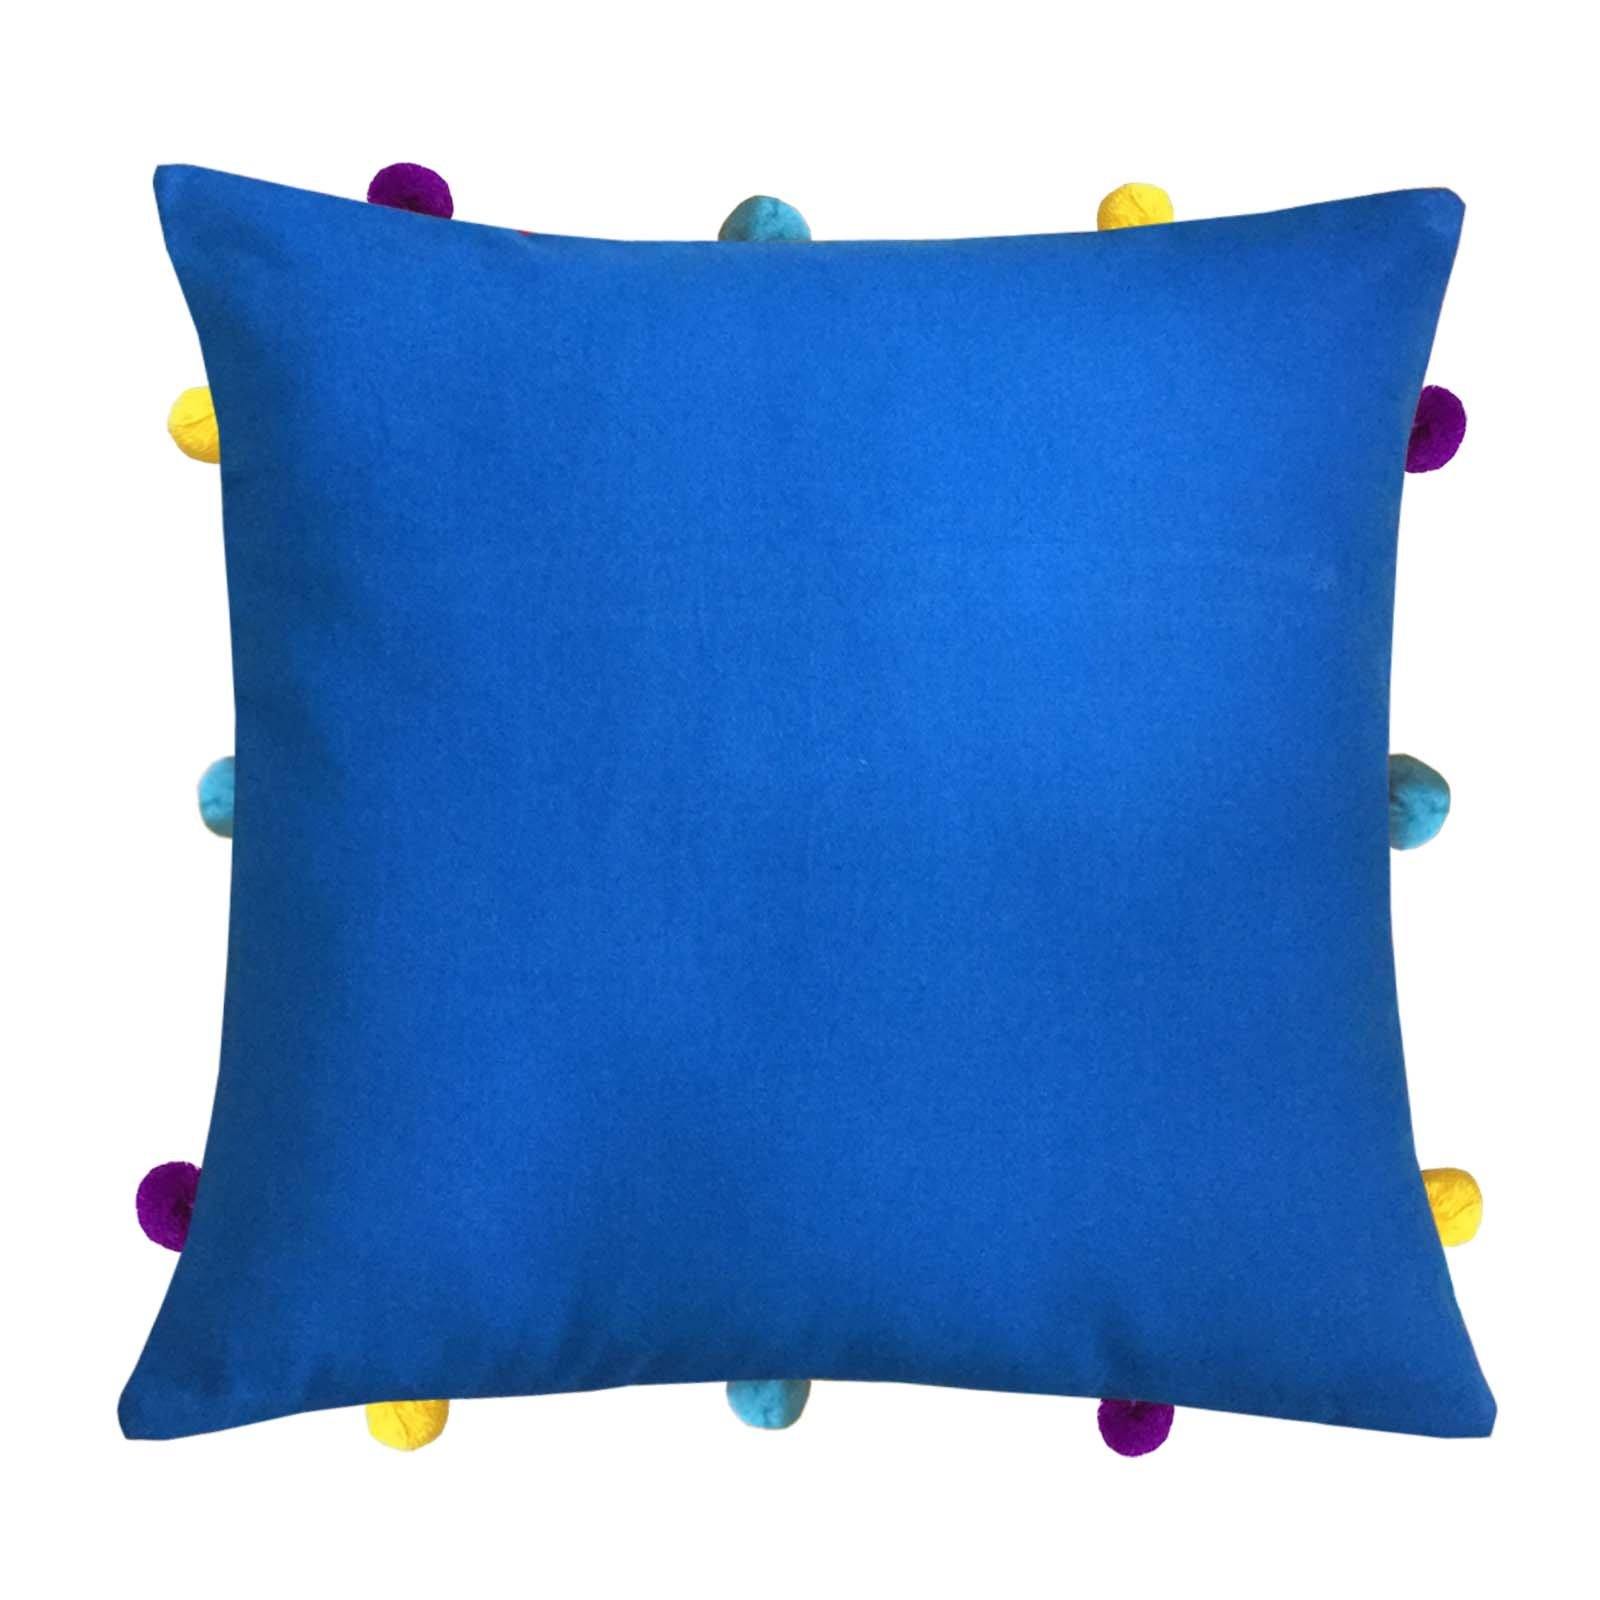 Lushomes Sky Diver Cushion Cover with Colorful pom poms (Single pc, 12 x 12”) - Lushomes